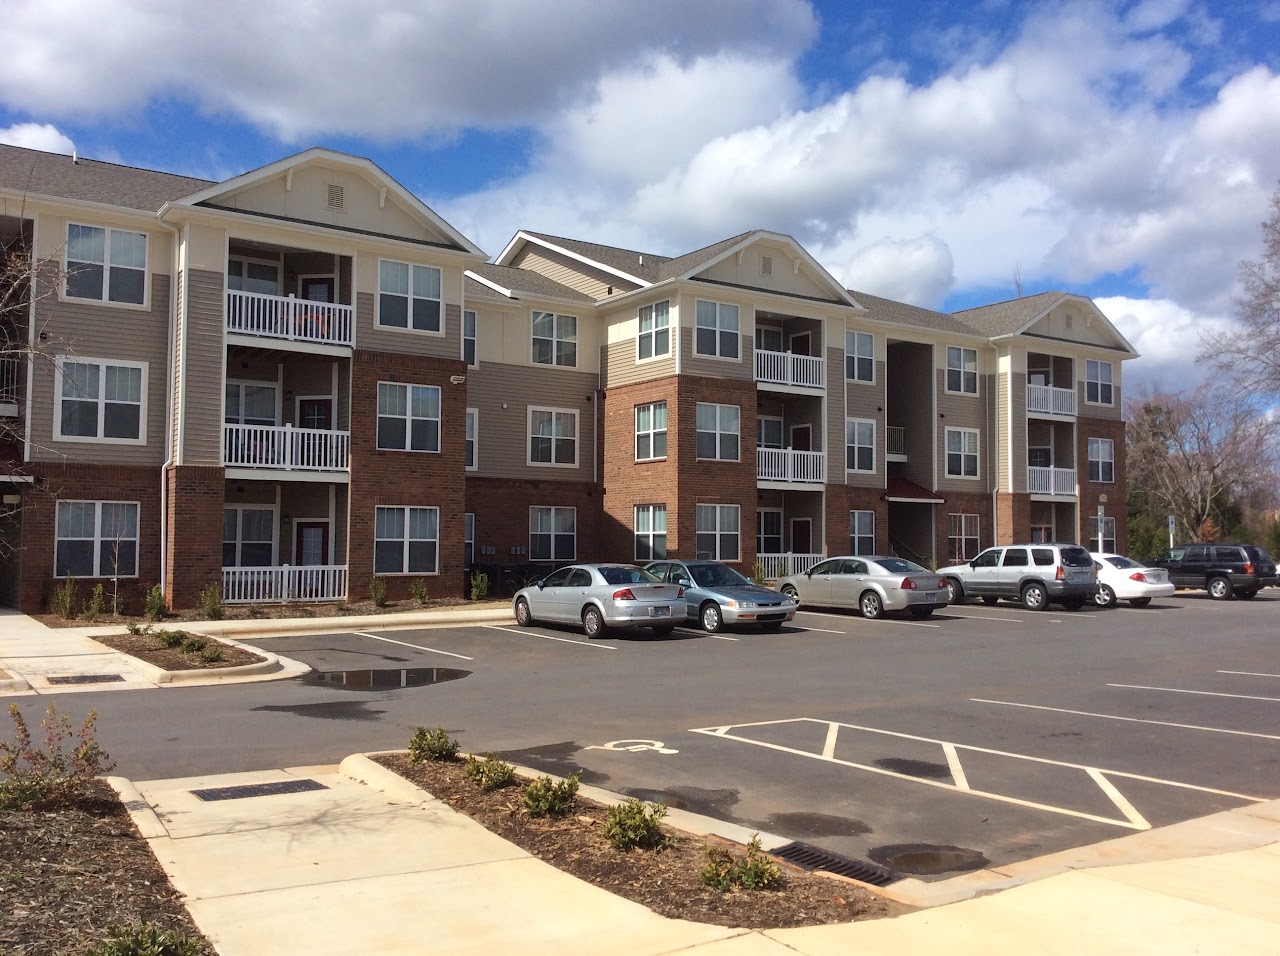 Photo of CAMDEN POINTE APARTMENTS. Affordable housing located at 123 CAMDEN POINT CT MOCKSVILLE, NC 28028